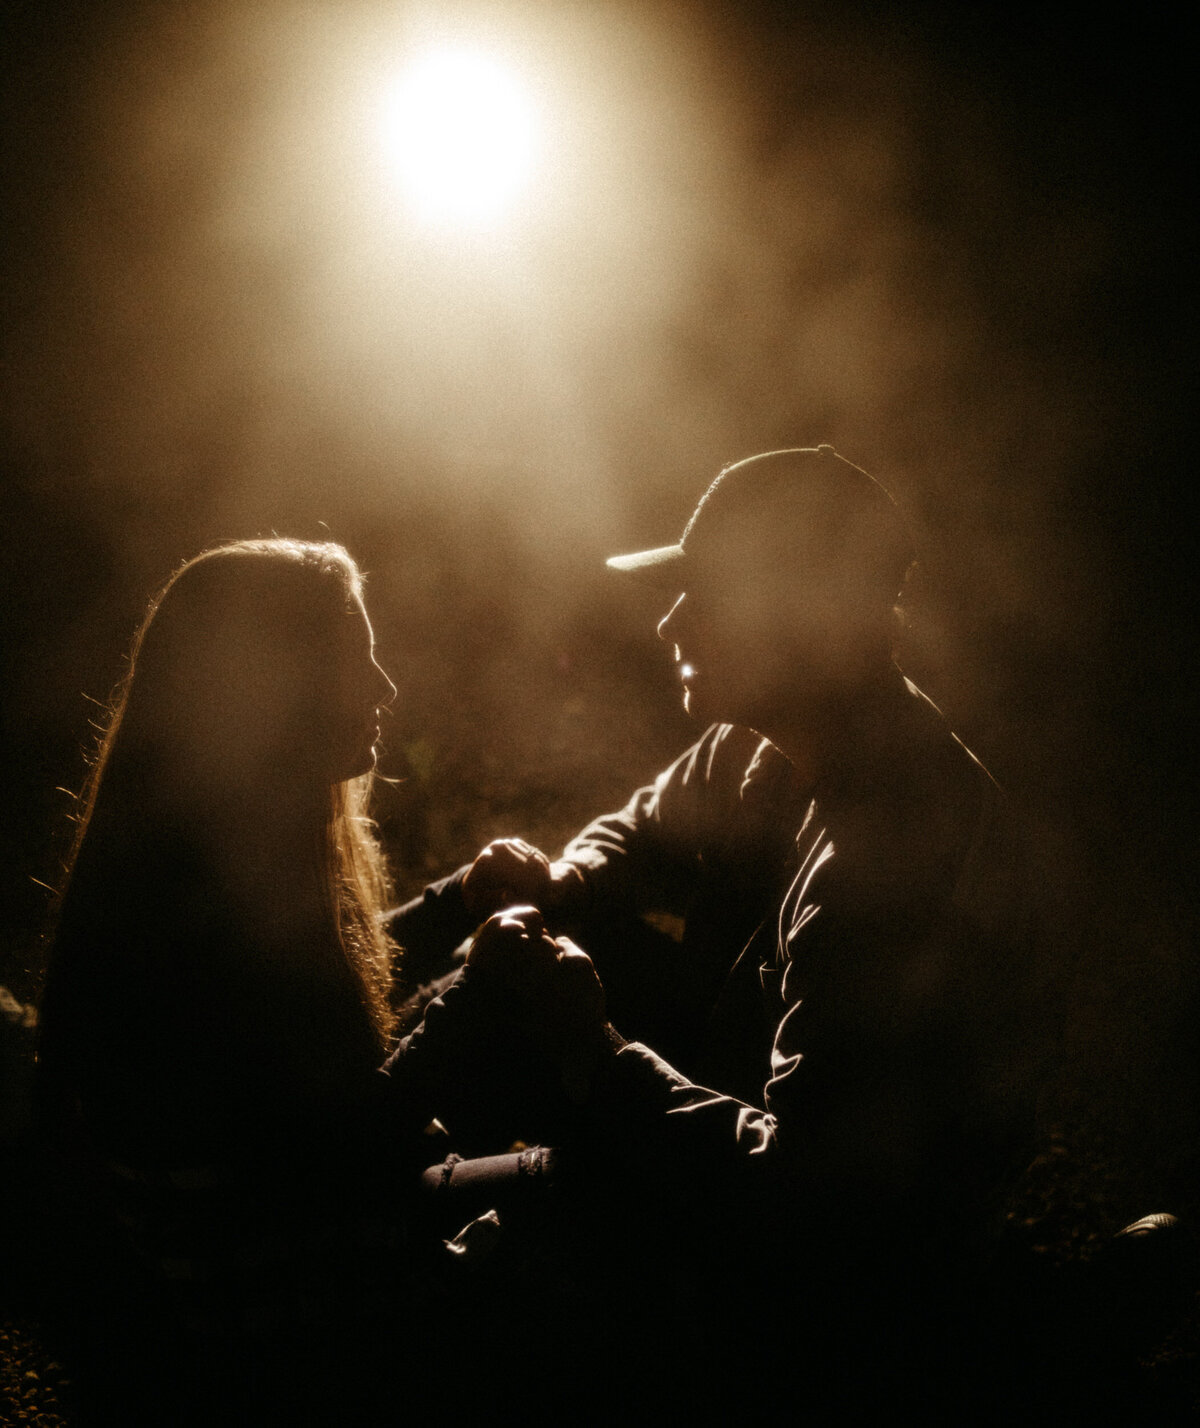 Silhouetted couple sitting on the ground straddling each other in front of a motorcycle headlight on a foggy night